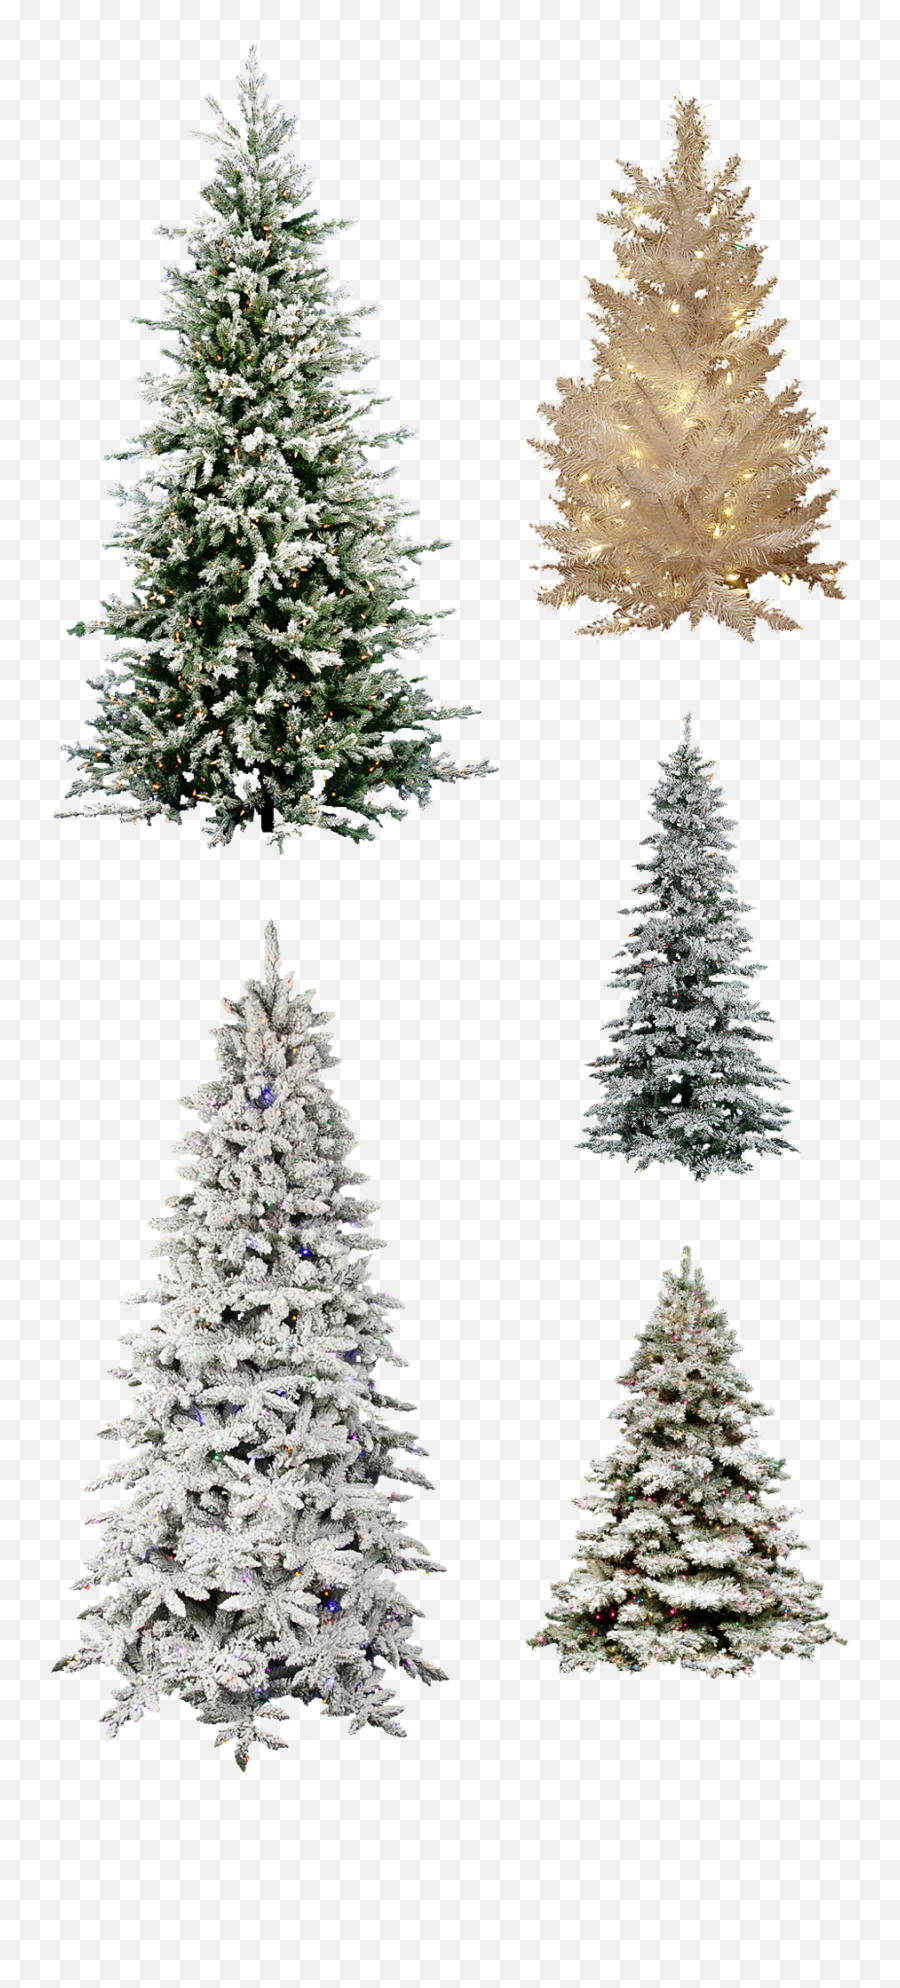 Misc Frosted Christmas Tree Pngs - Christmas Tree,Christmas Pngs